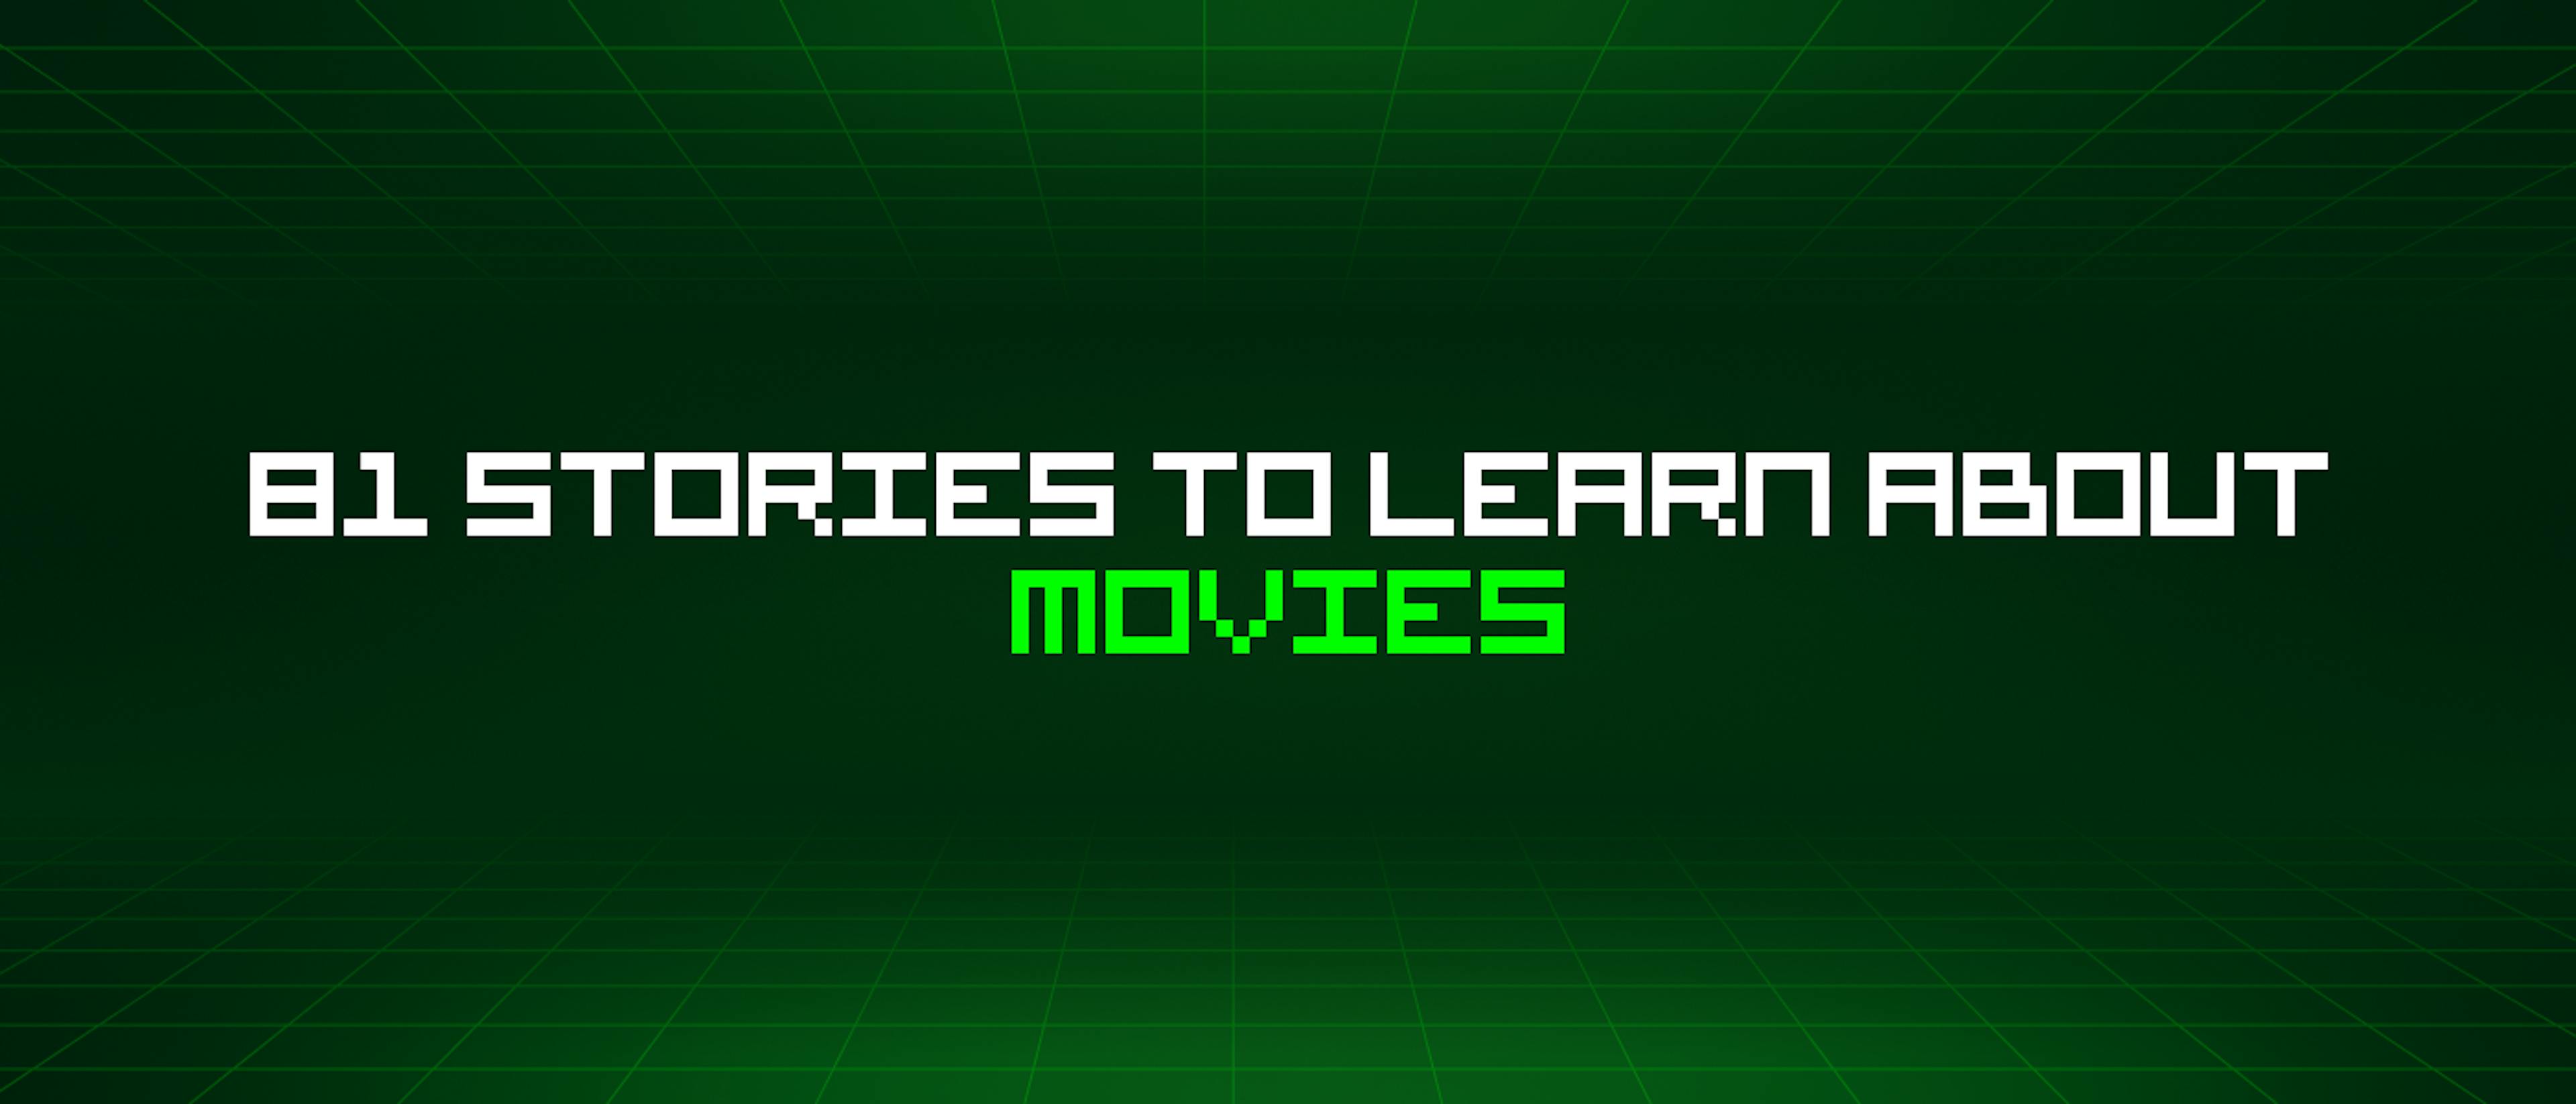 featured image - 81 Stories To Learn About Movies